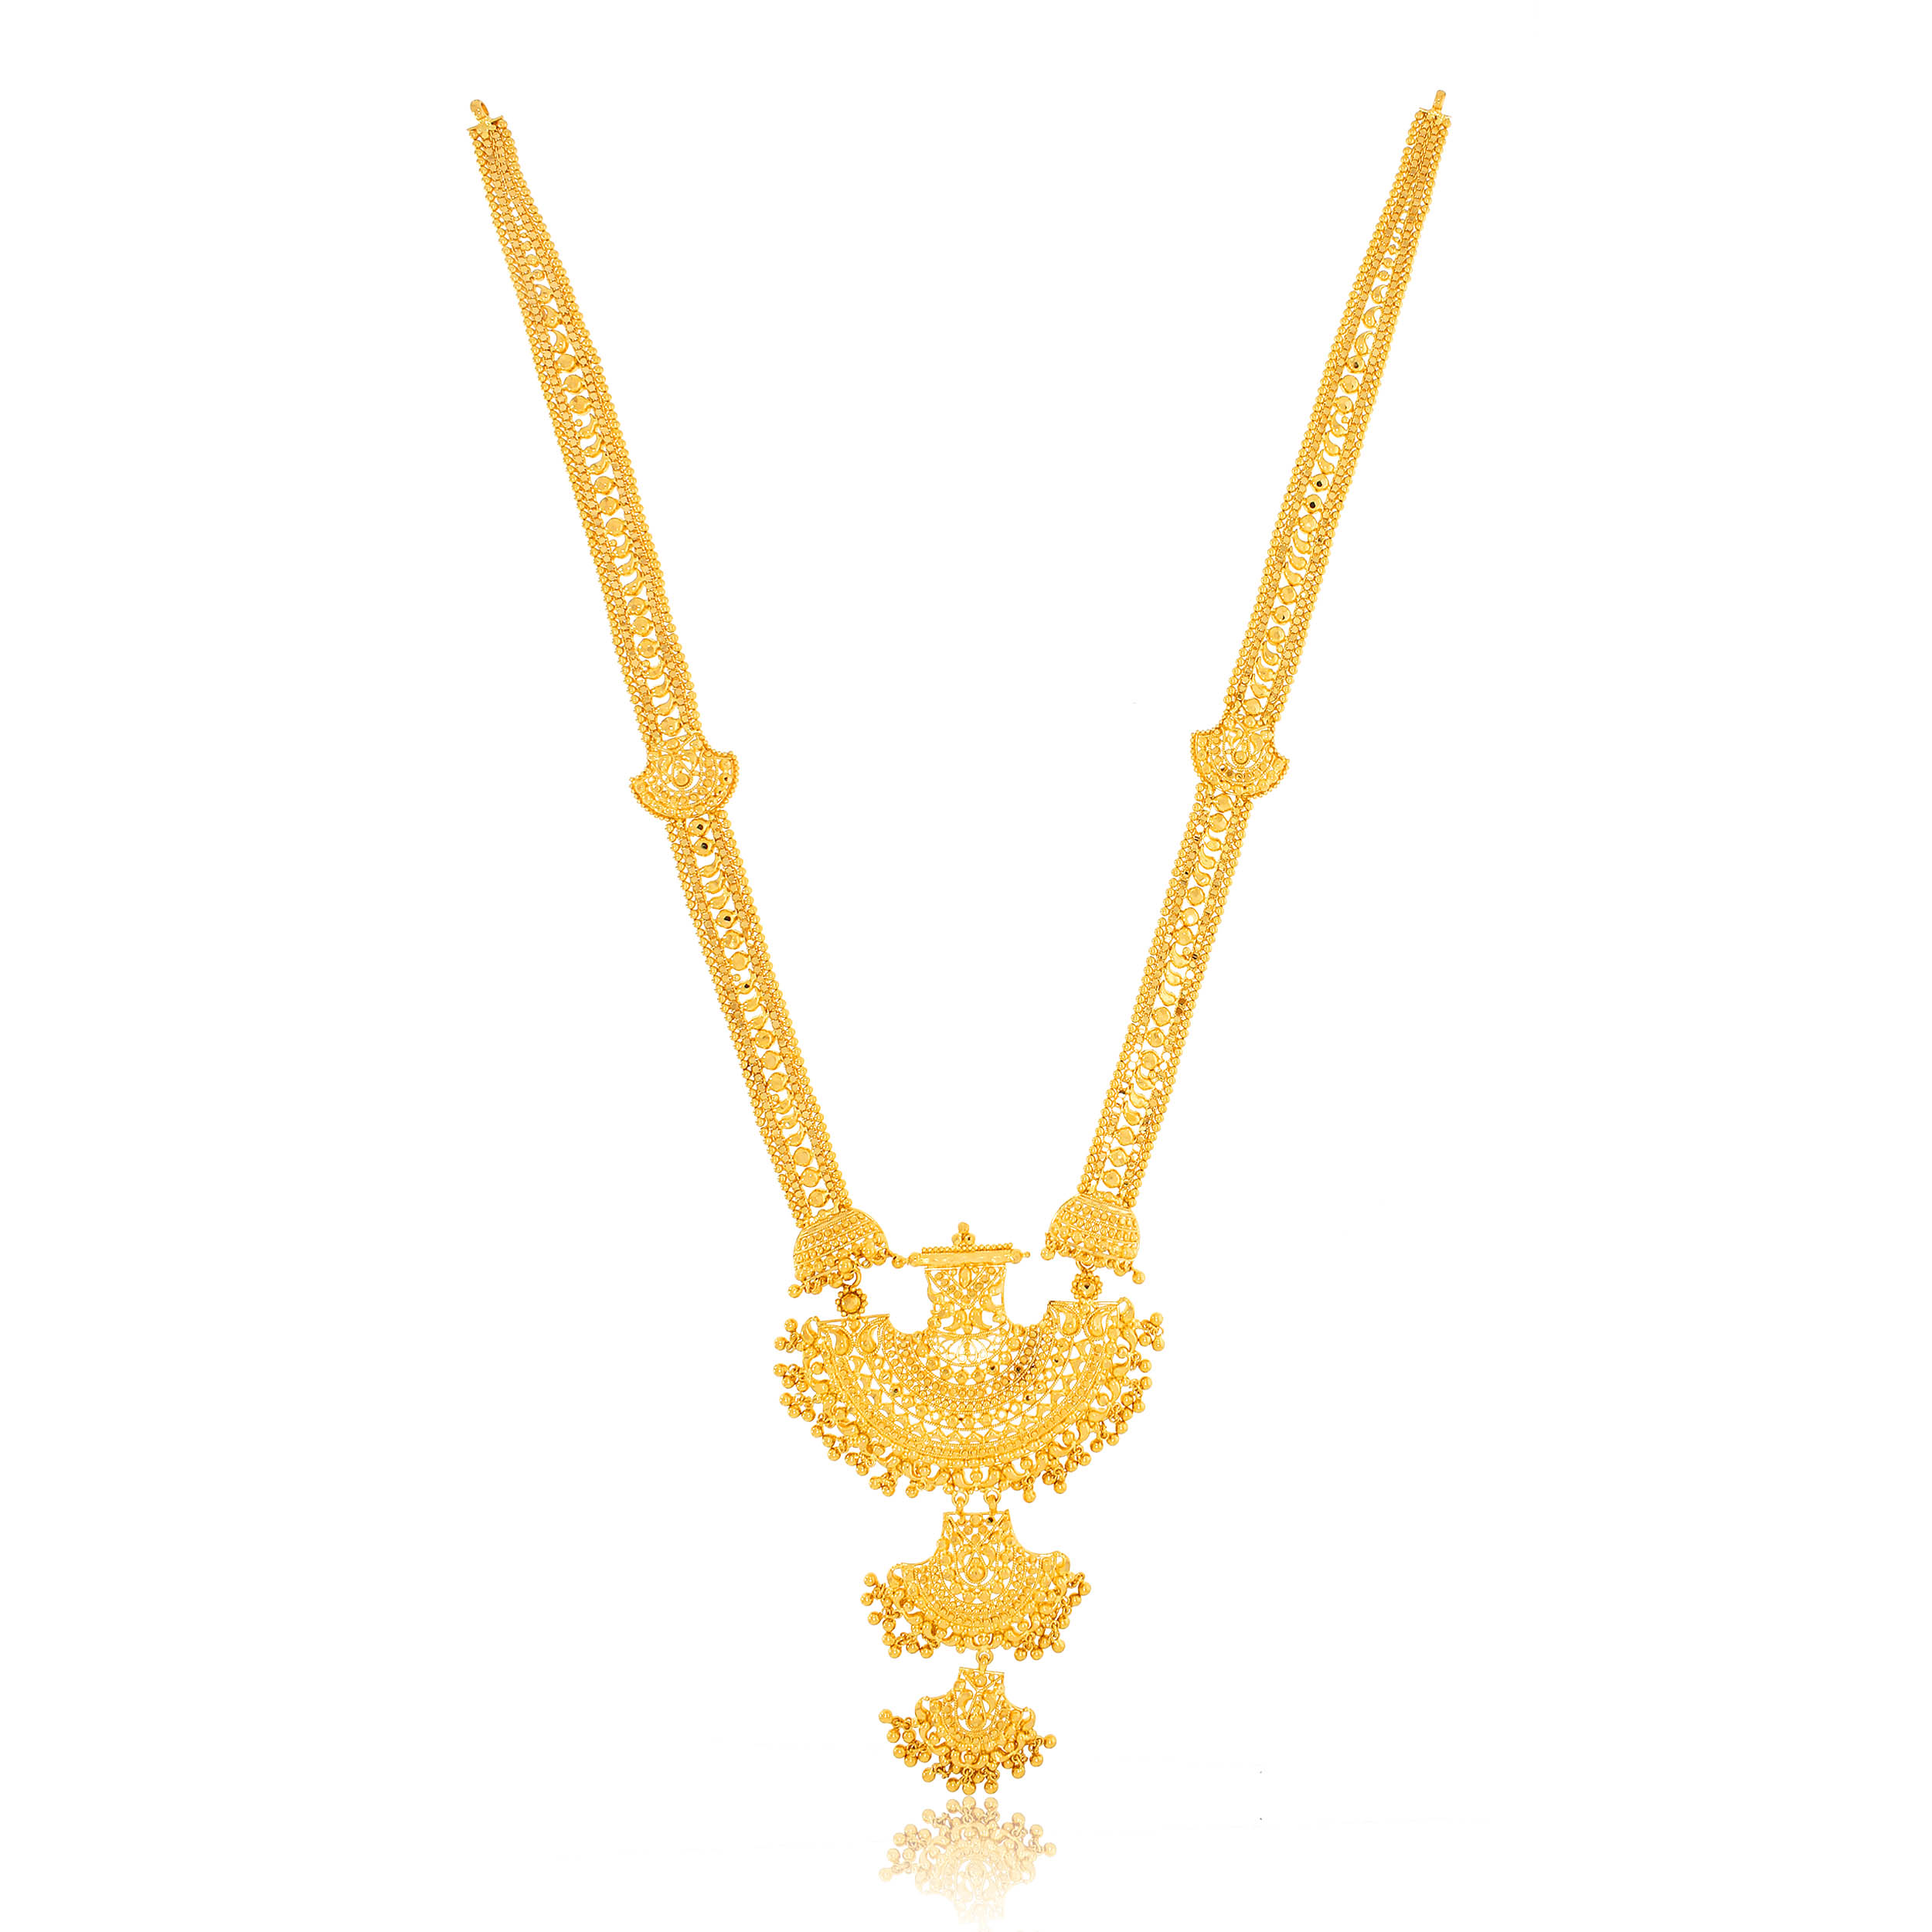 RULA AABI JEWELS 22CT BIS HALLMARK GOLD LONG  NECKLACE FOR WOMAN